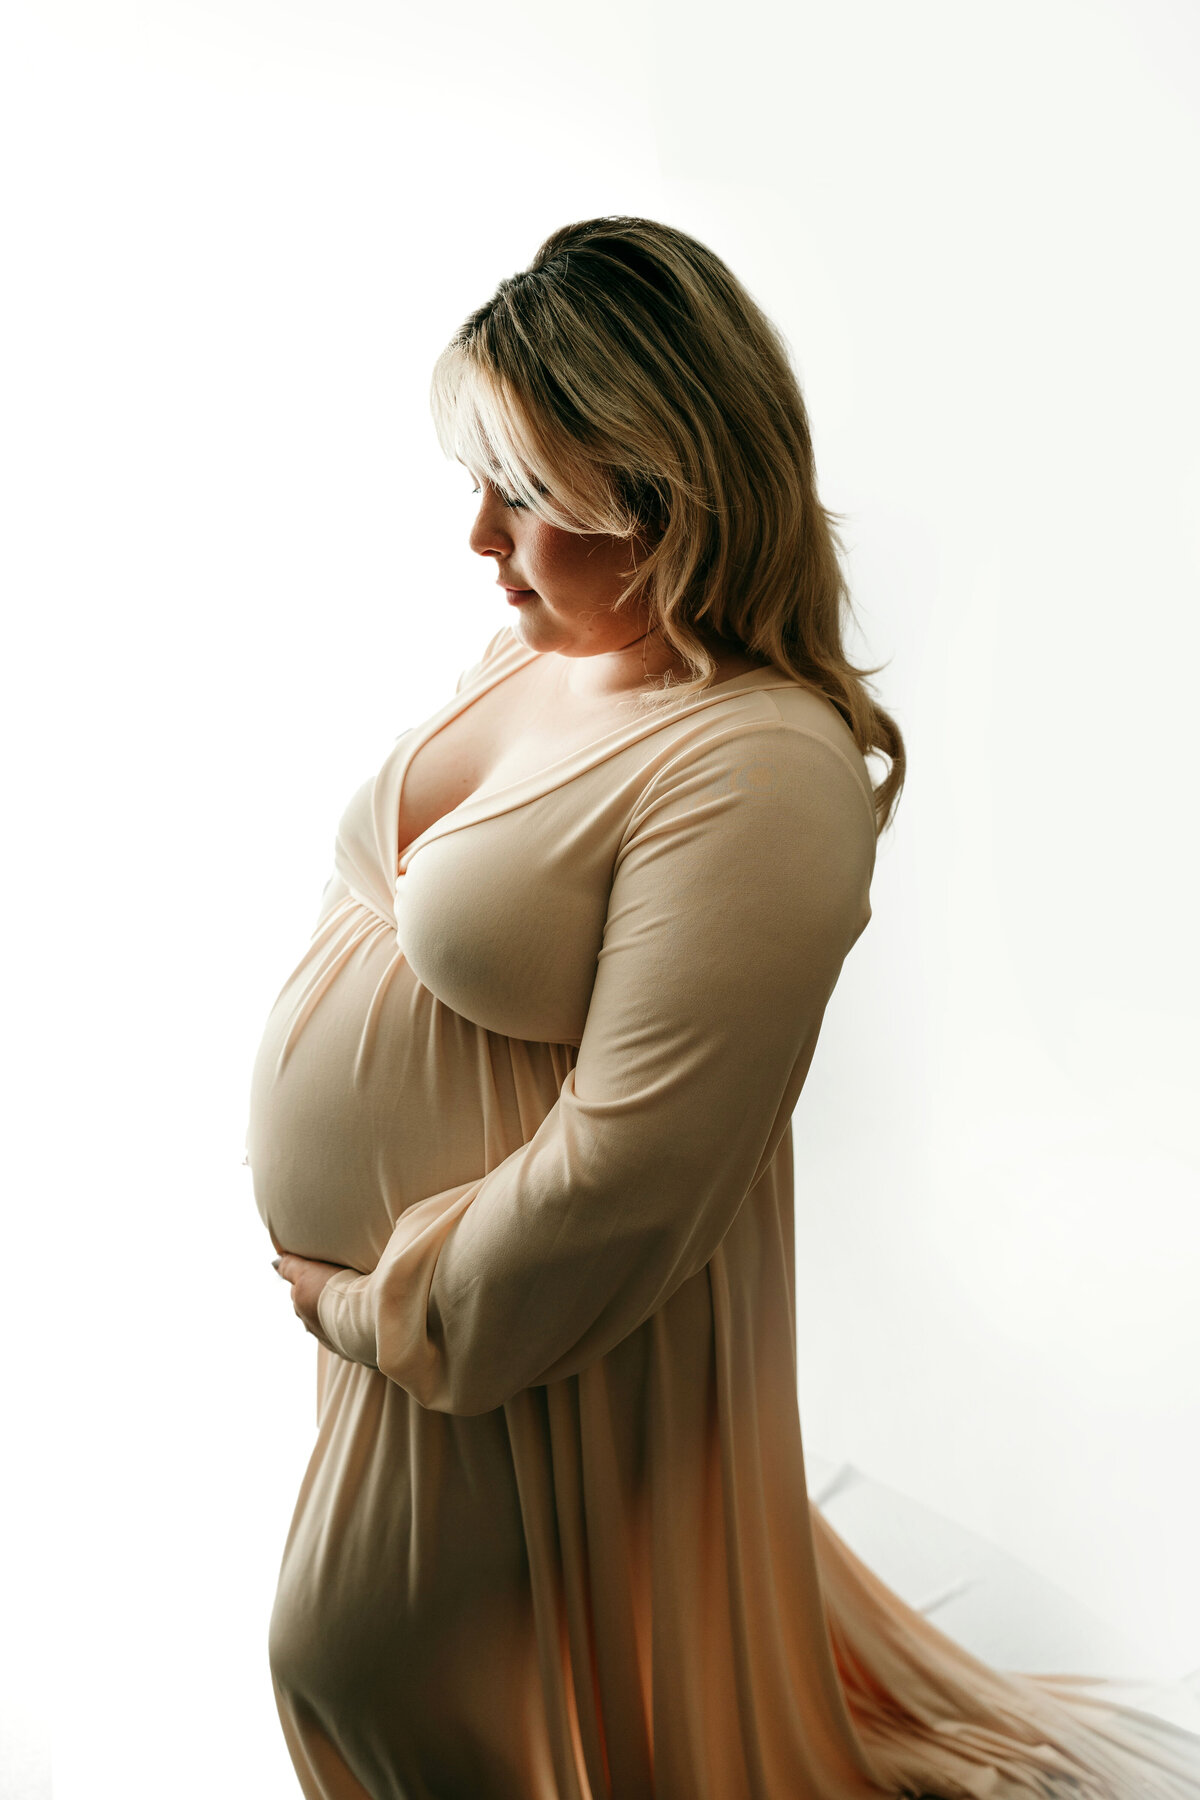 An expecting mother holds her growing stomach in a flowy tan dress.